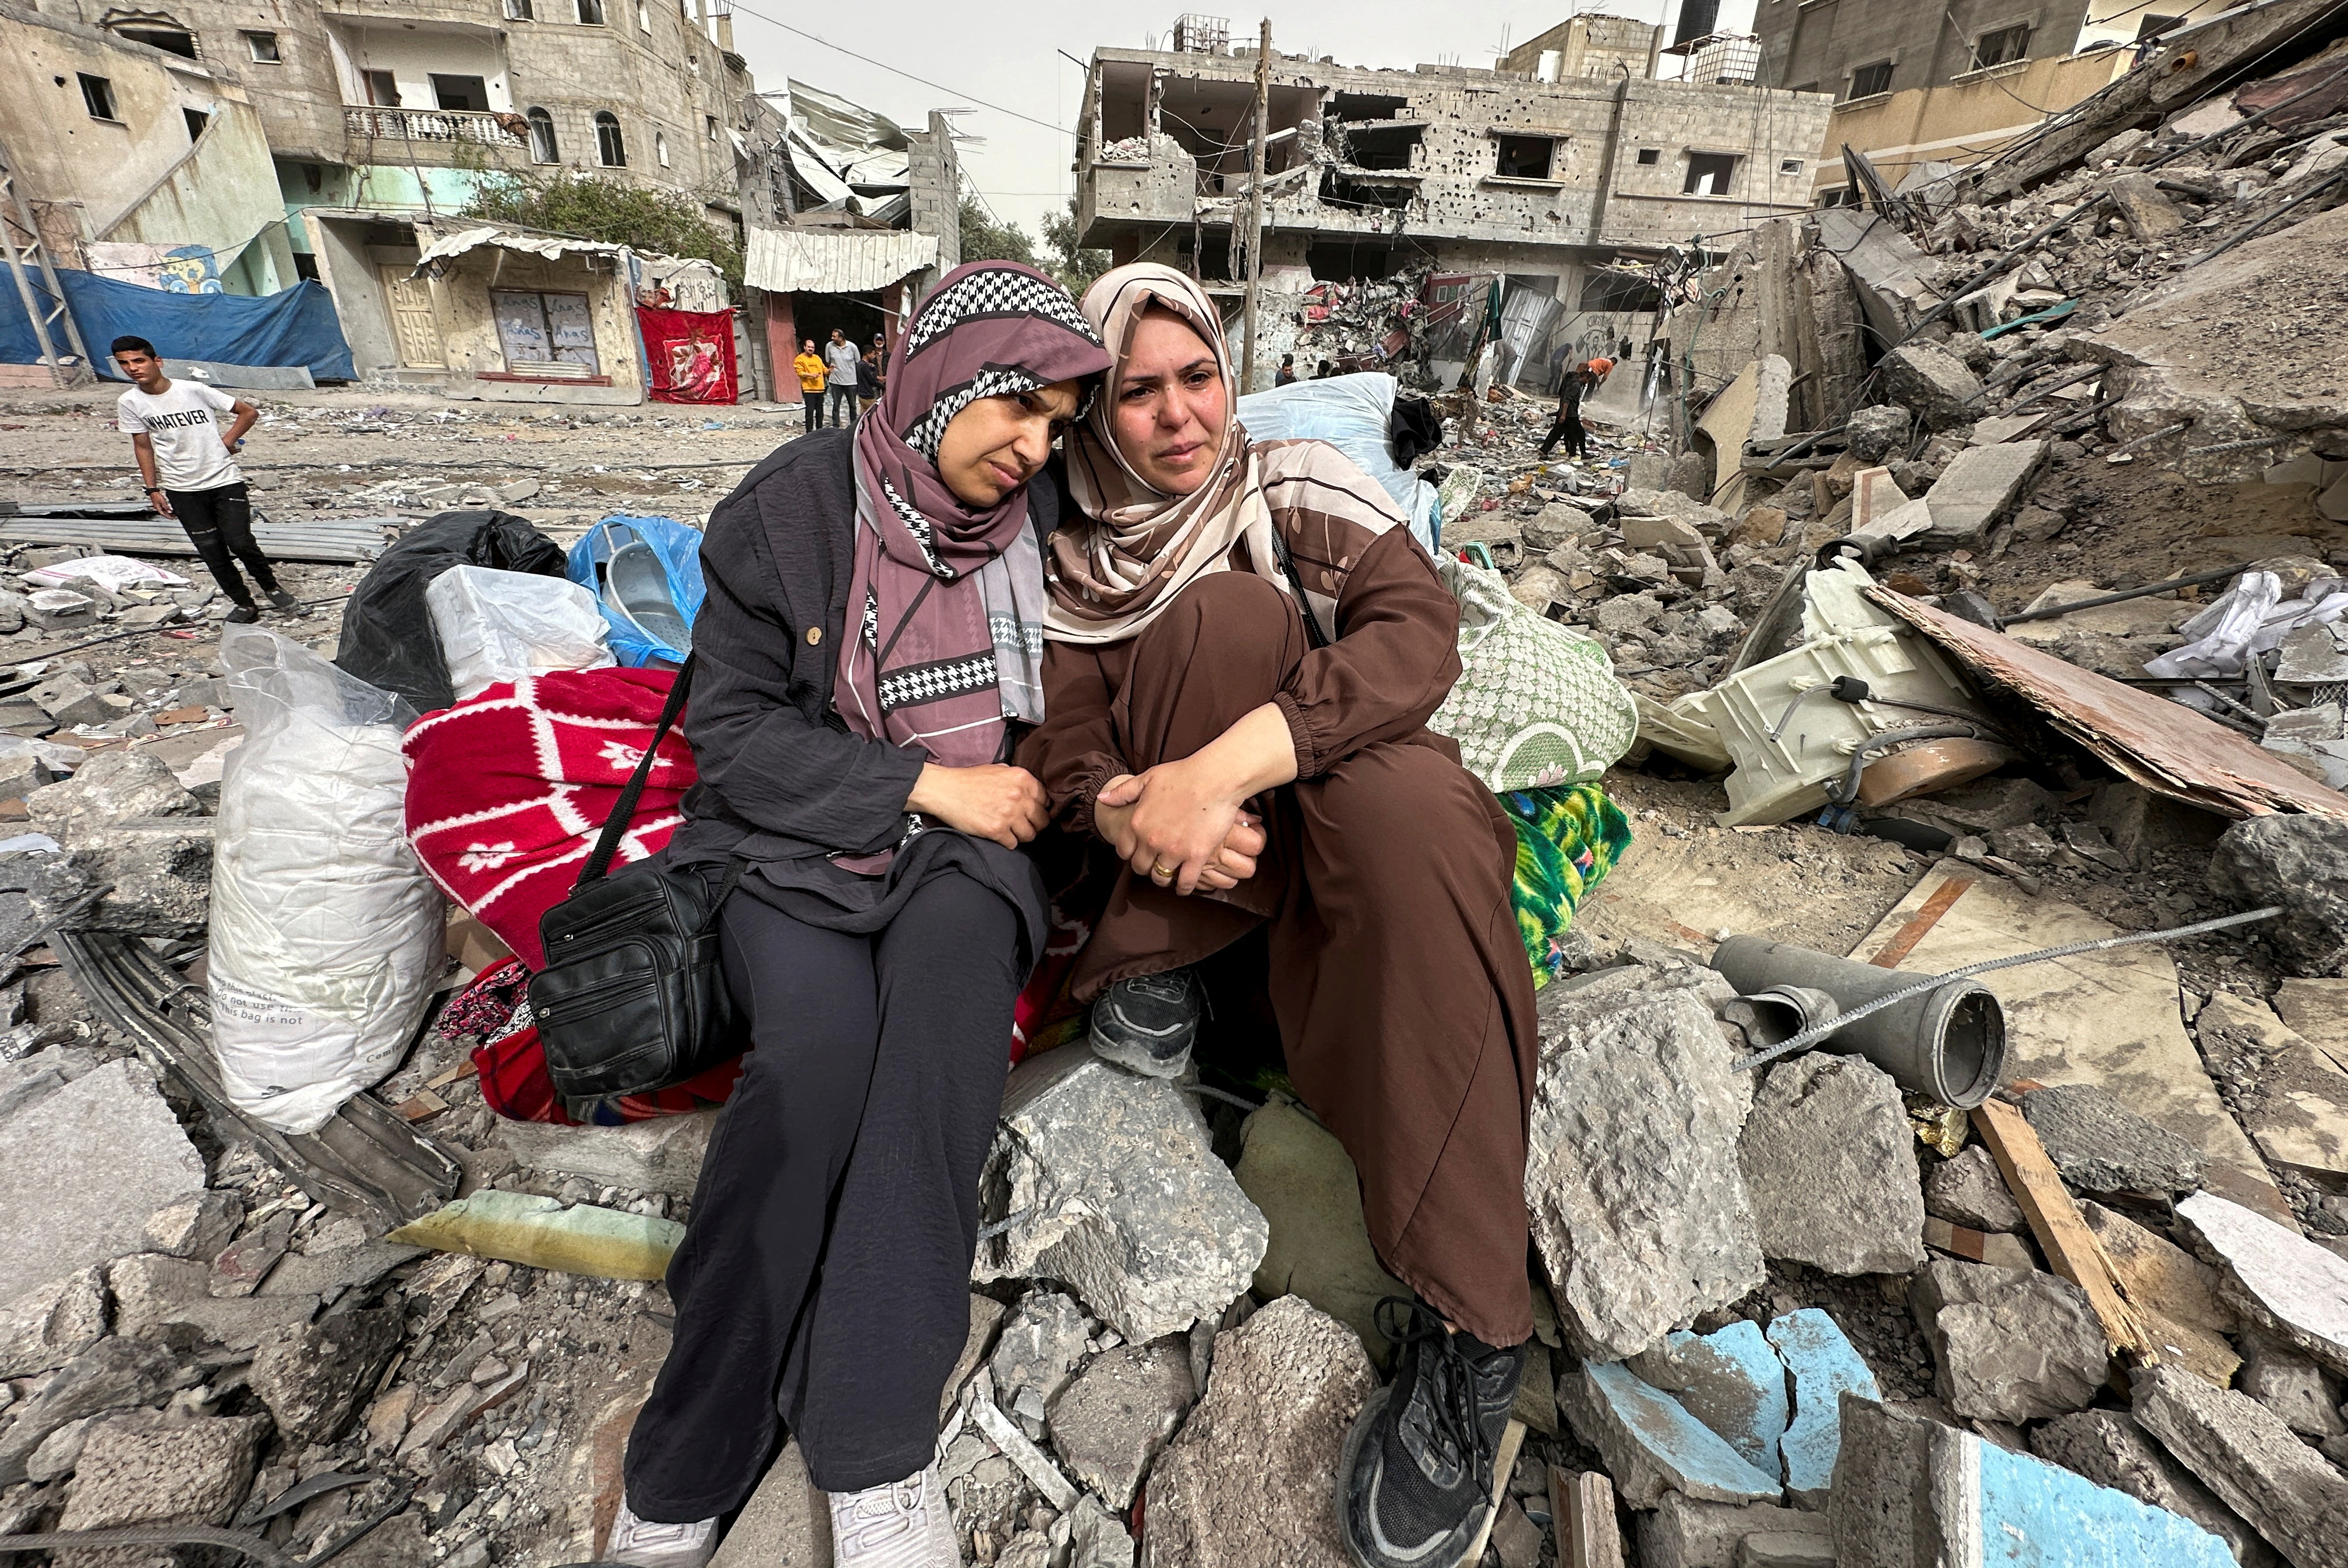 Palestinian women react as they sit on the rubble of a residential building housing their apartments, following an Israeli raid